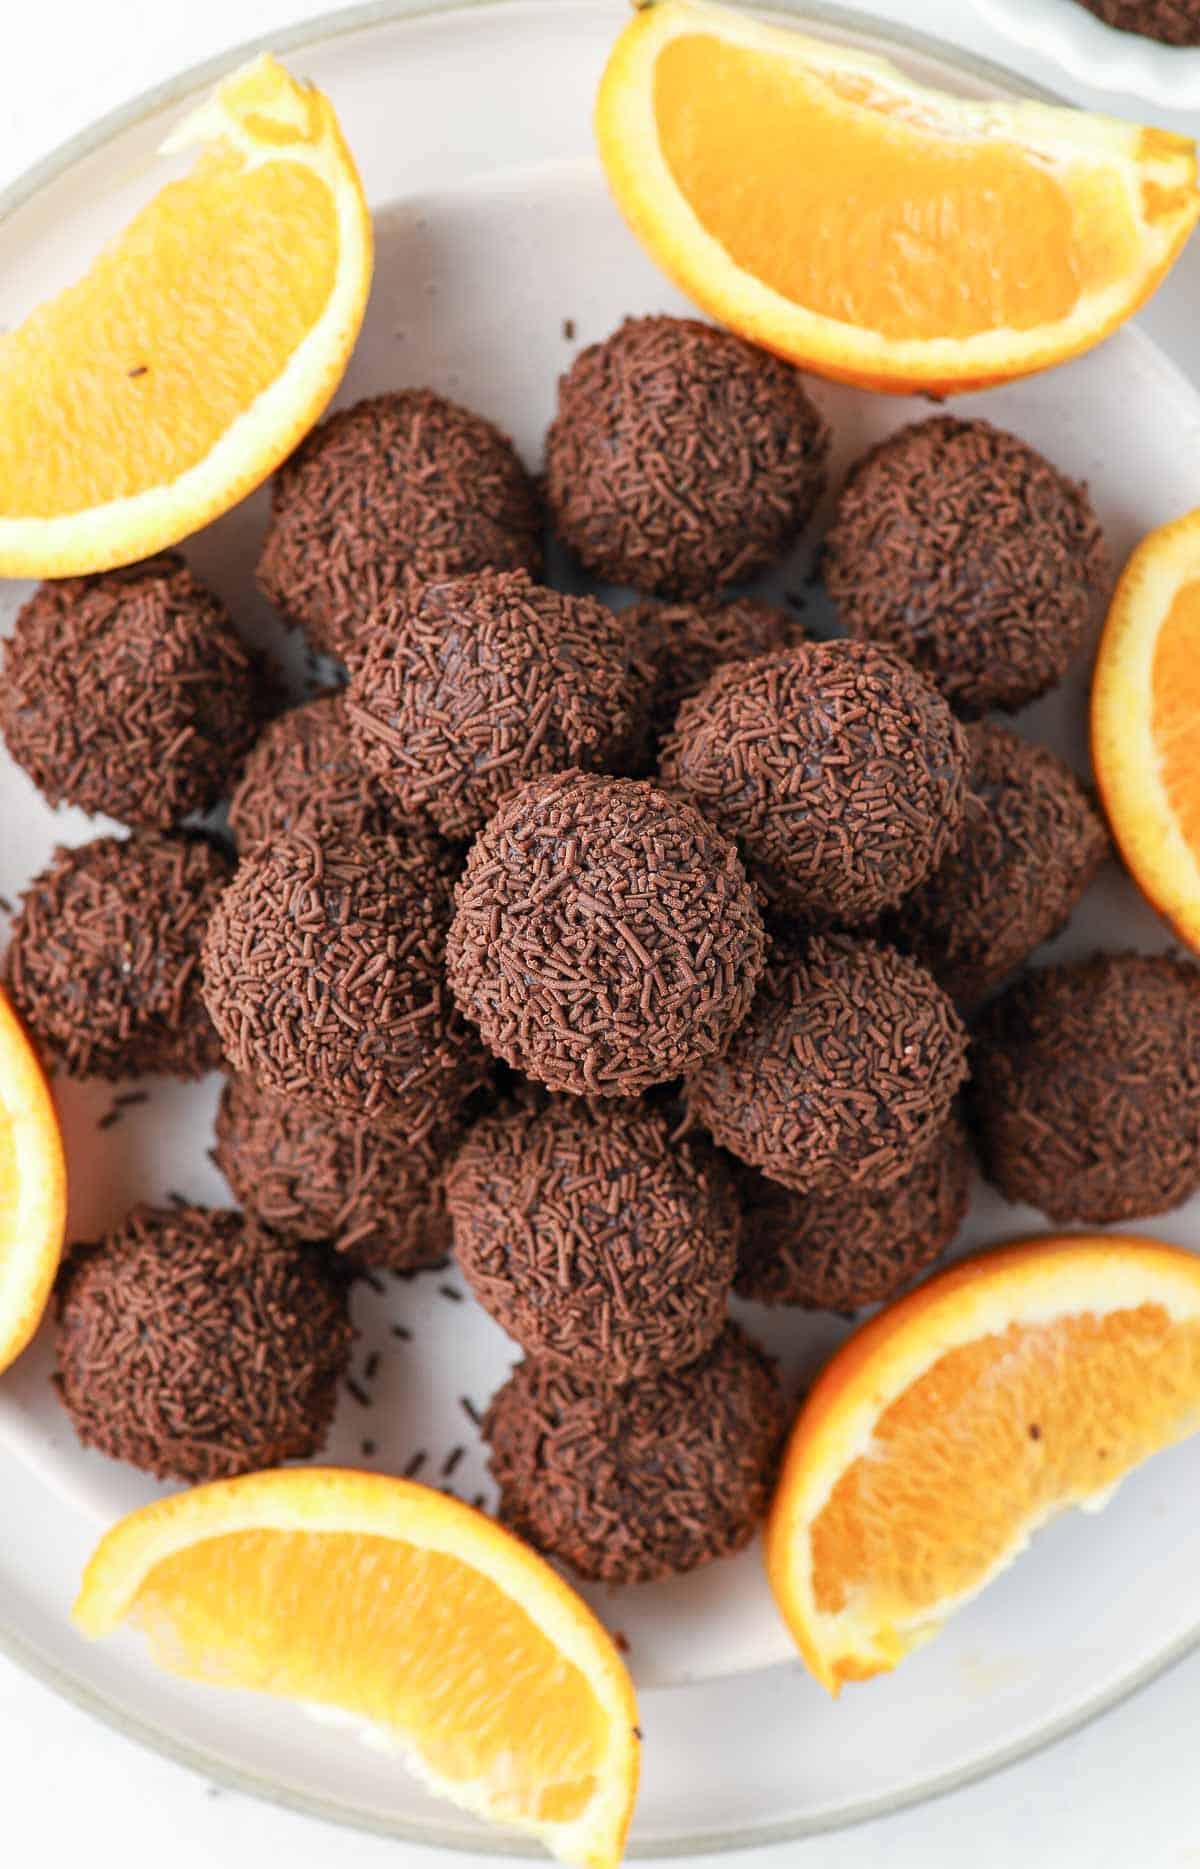 Plate of truffles, garnished with some orange slices.